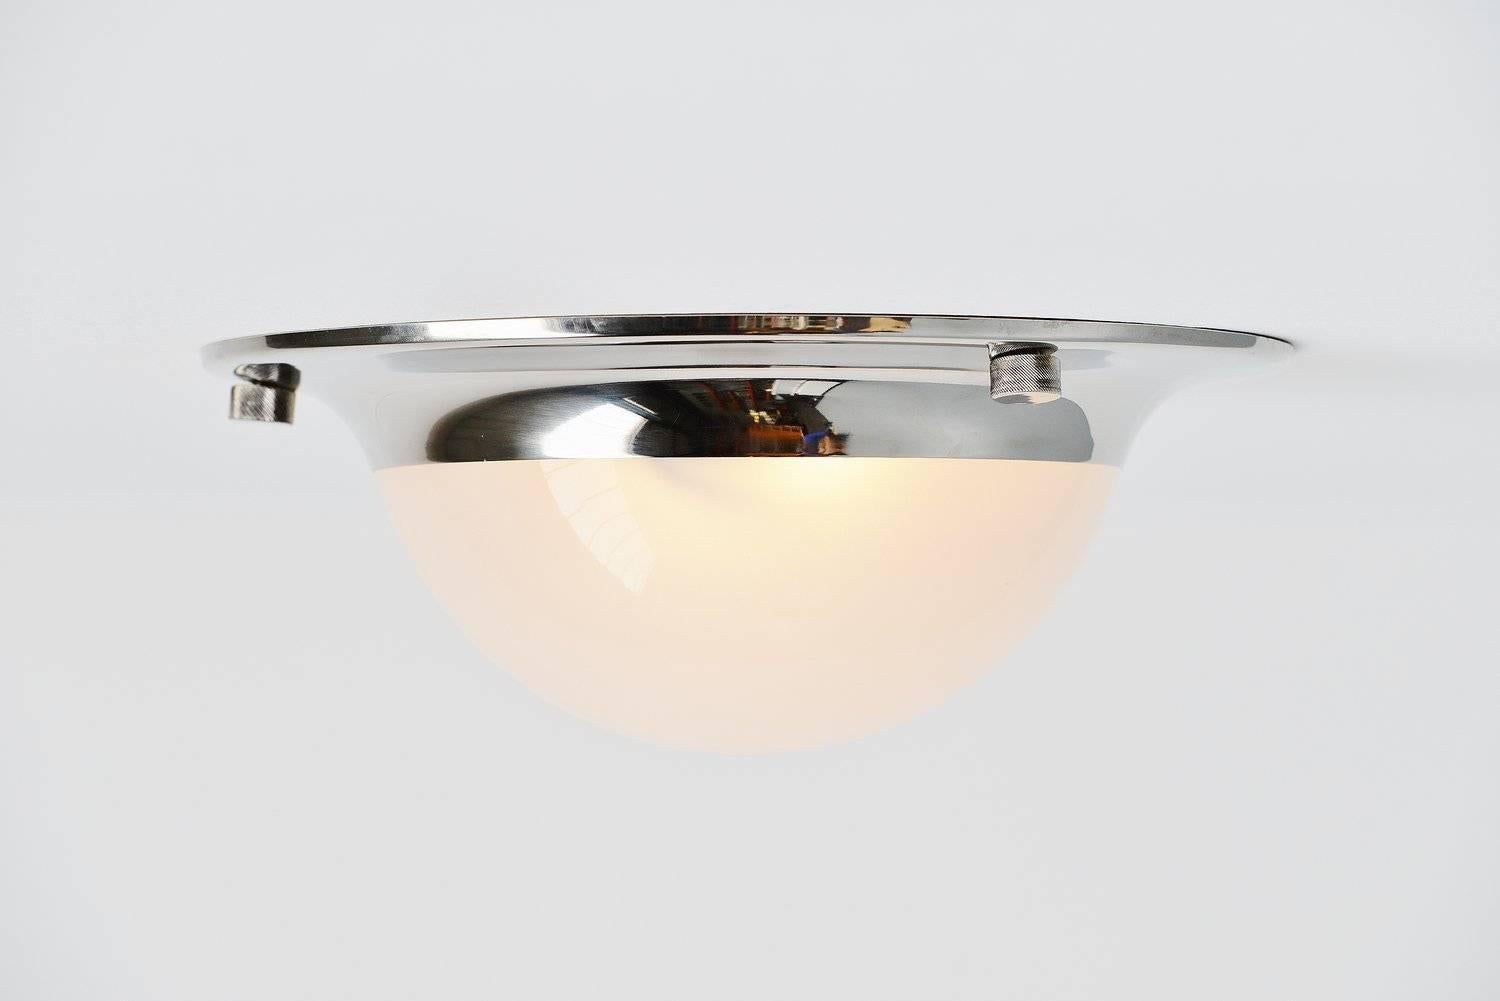 Nice ceiling or wall lamp model (Tommy) LSP6 designed by Luigi Caccia Dominioni for Azucena, Italy, 1965. This is for a lamp that can be used as flush mount ceiling lamp or wall lamp. The lamp has a chrome plated metal structure and glass frosted